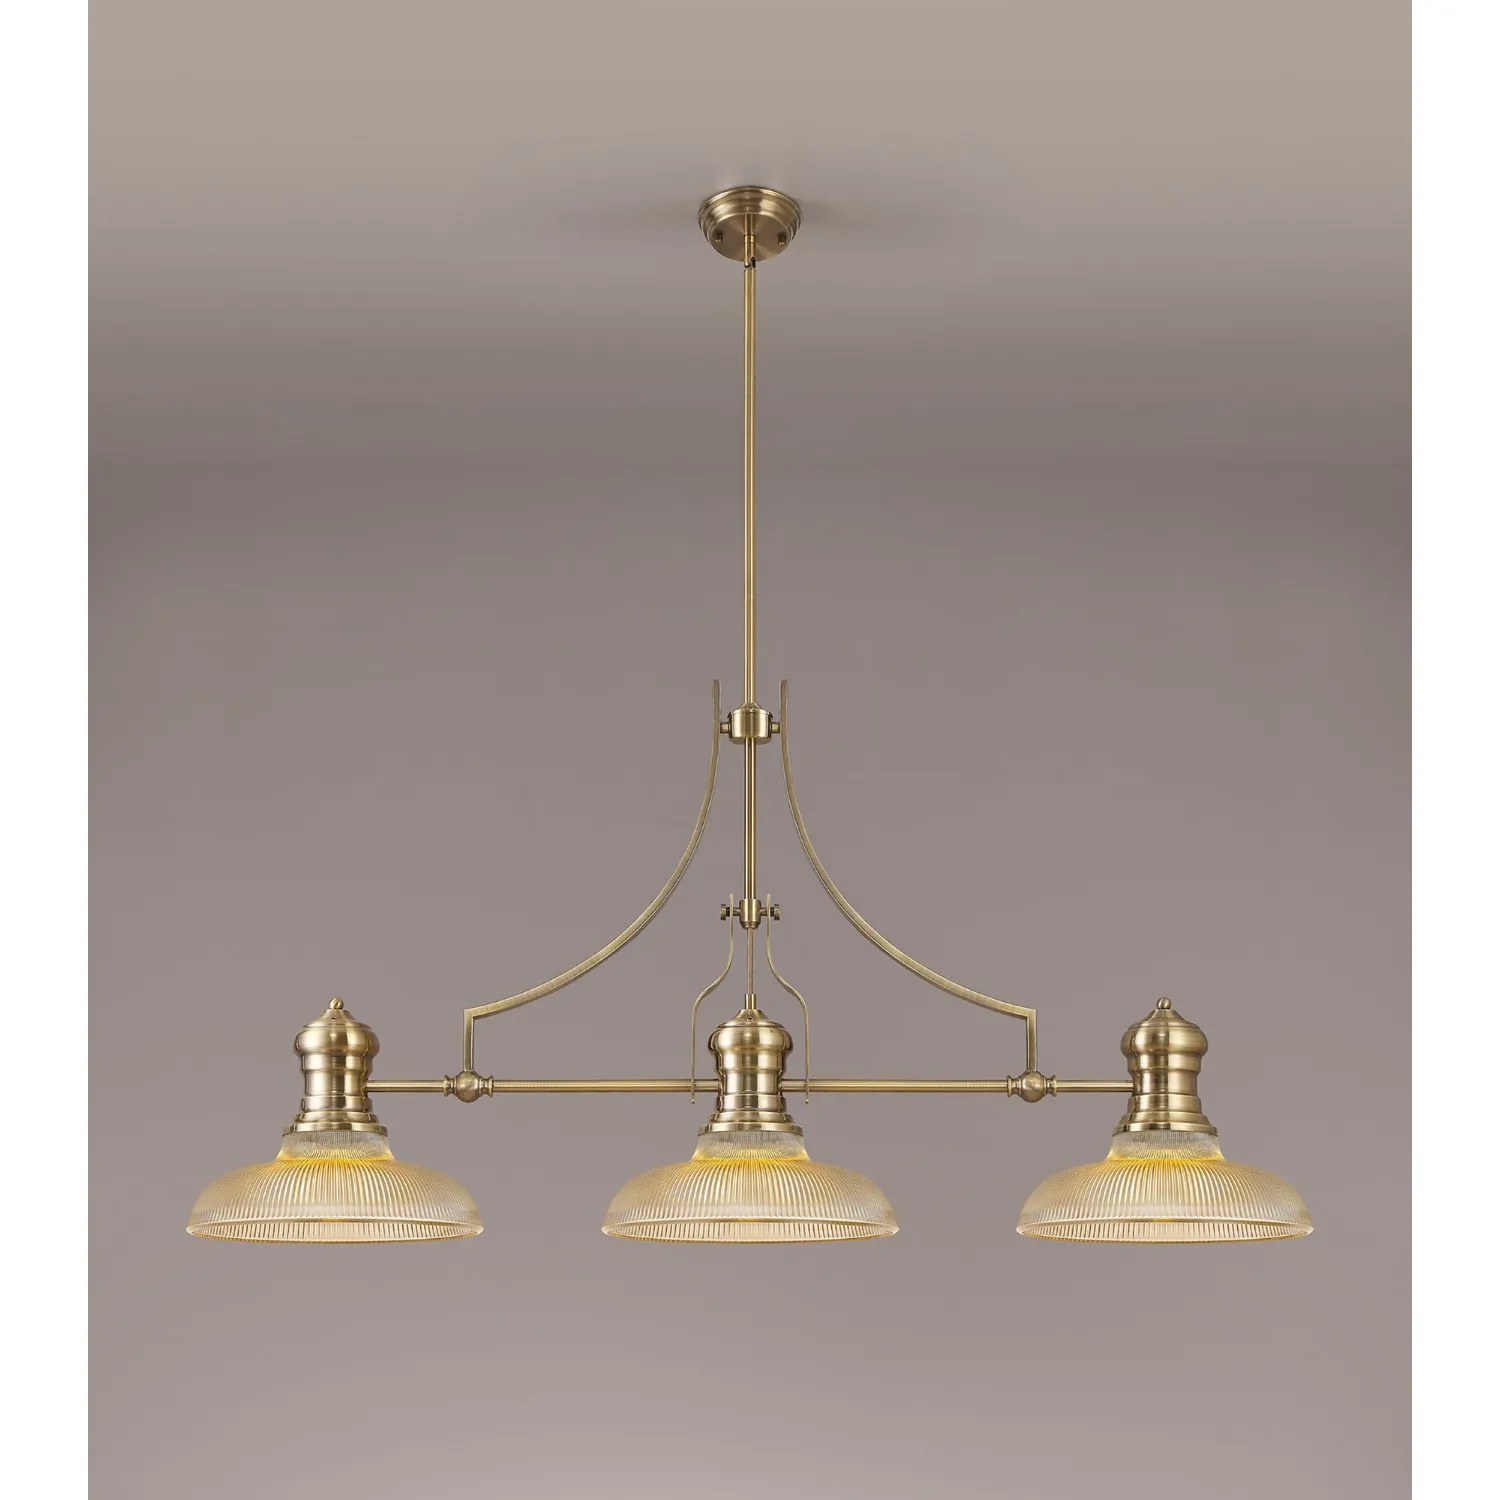 Sandy 3 Light Linear Pendant E27 With 30cm Round Glass Shade, Antique Brass, Amber